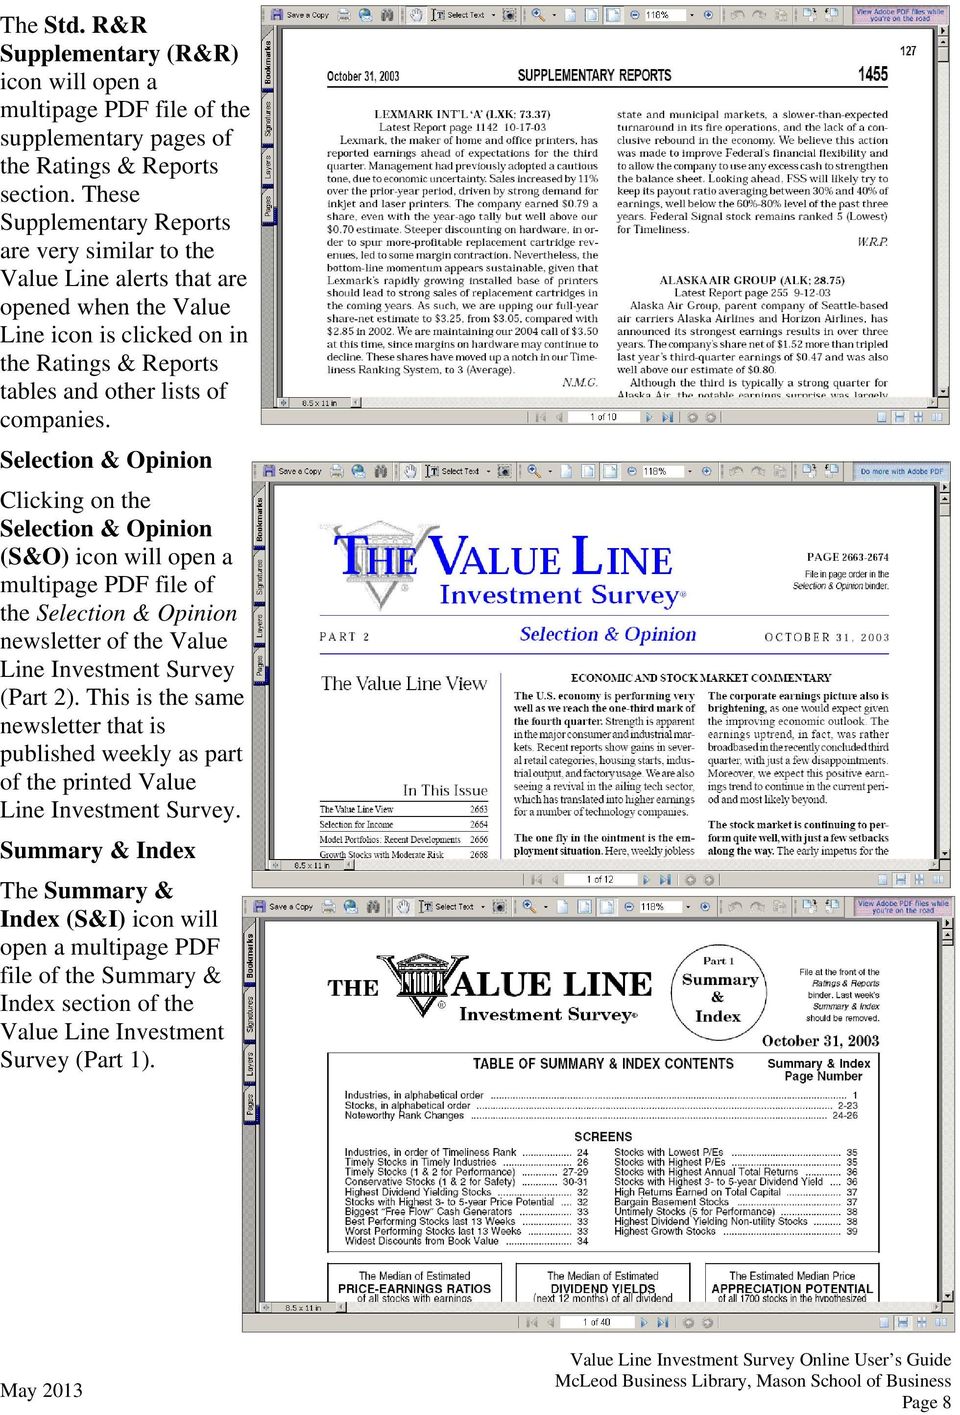 Selection & Opinion Clicking on the Selection & Opinion (S&O) icon will open a multipage PDF file of the Selection & Opinion newsletter of the Value Line Investment Survey (Part 2).